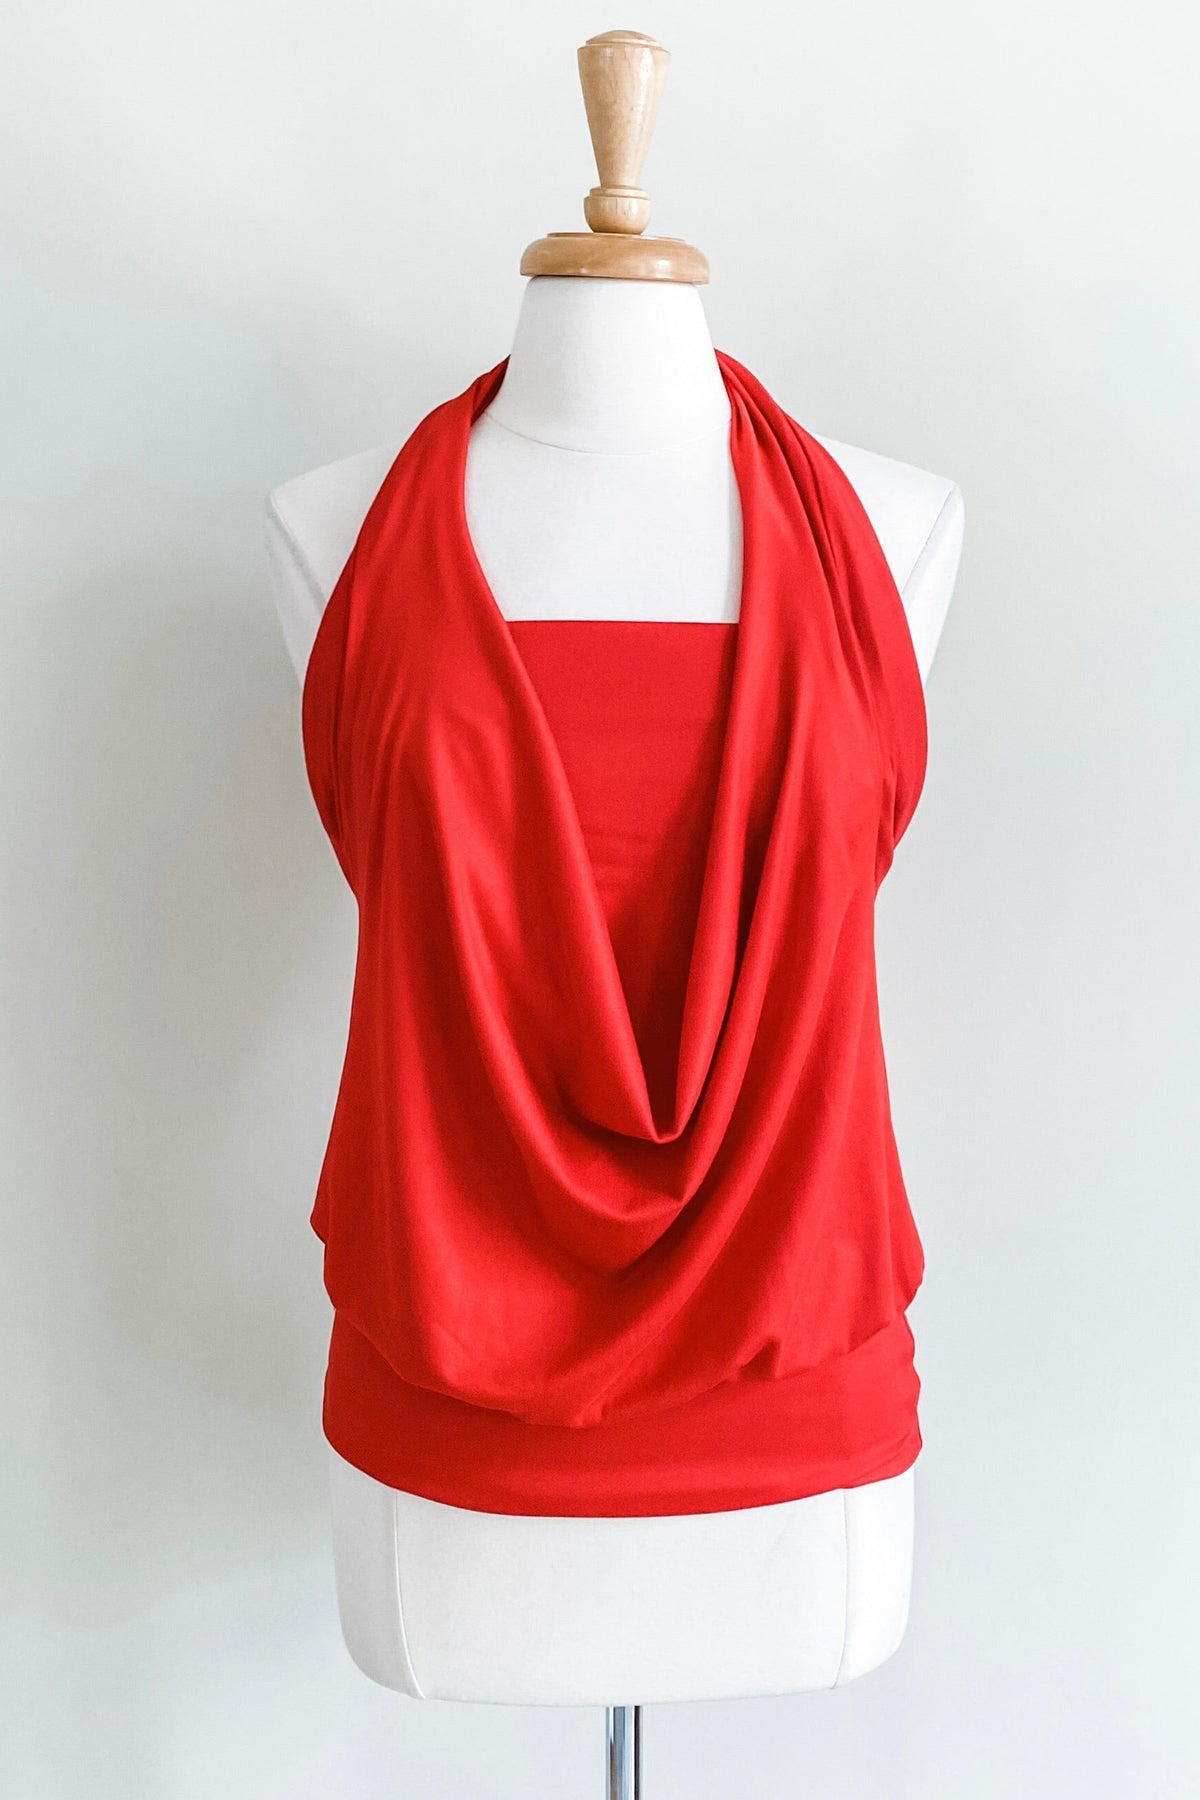 Diane Kroe One-4-All Top (Red) - Warm Weather Capsule Collection 